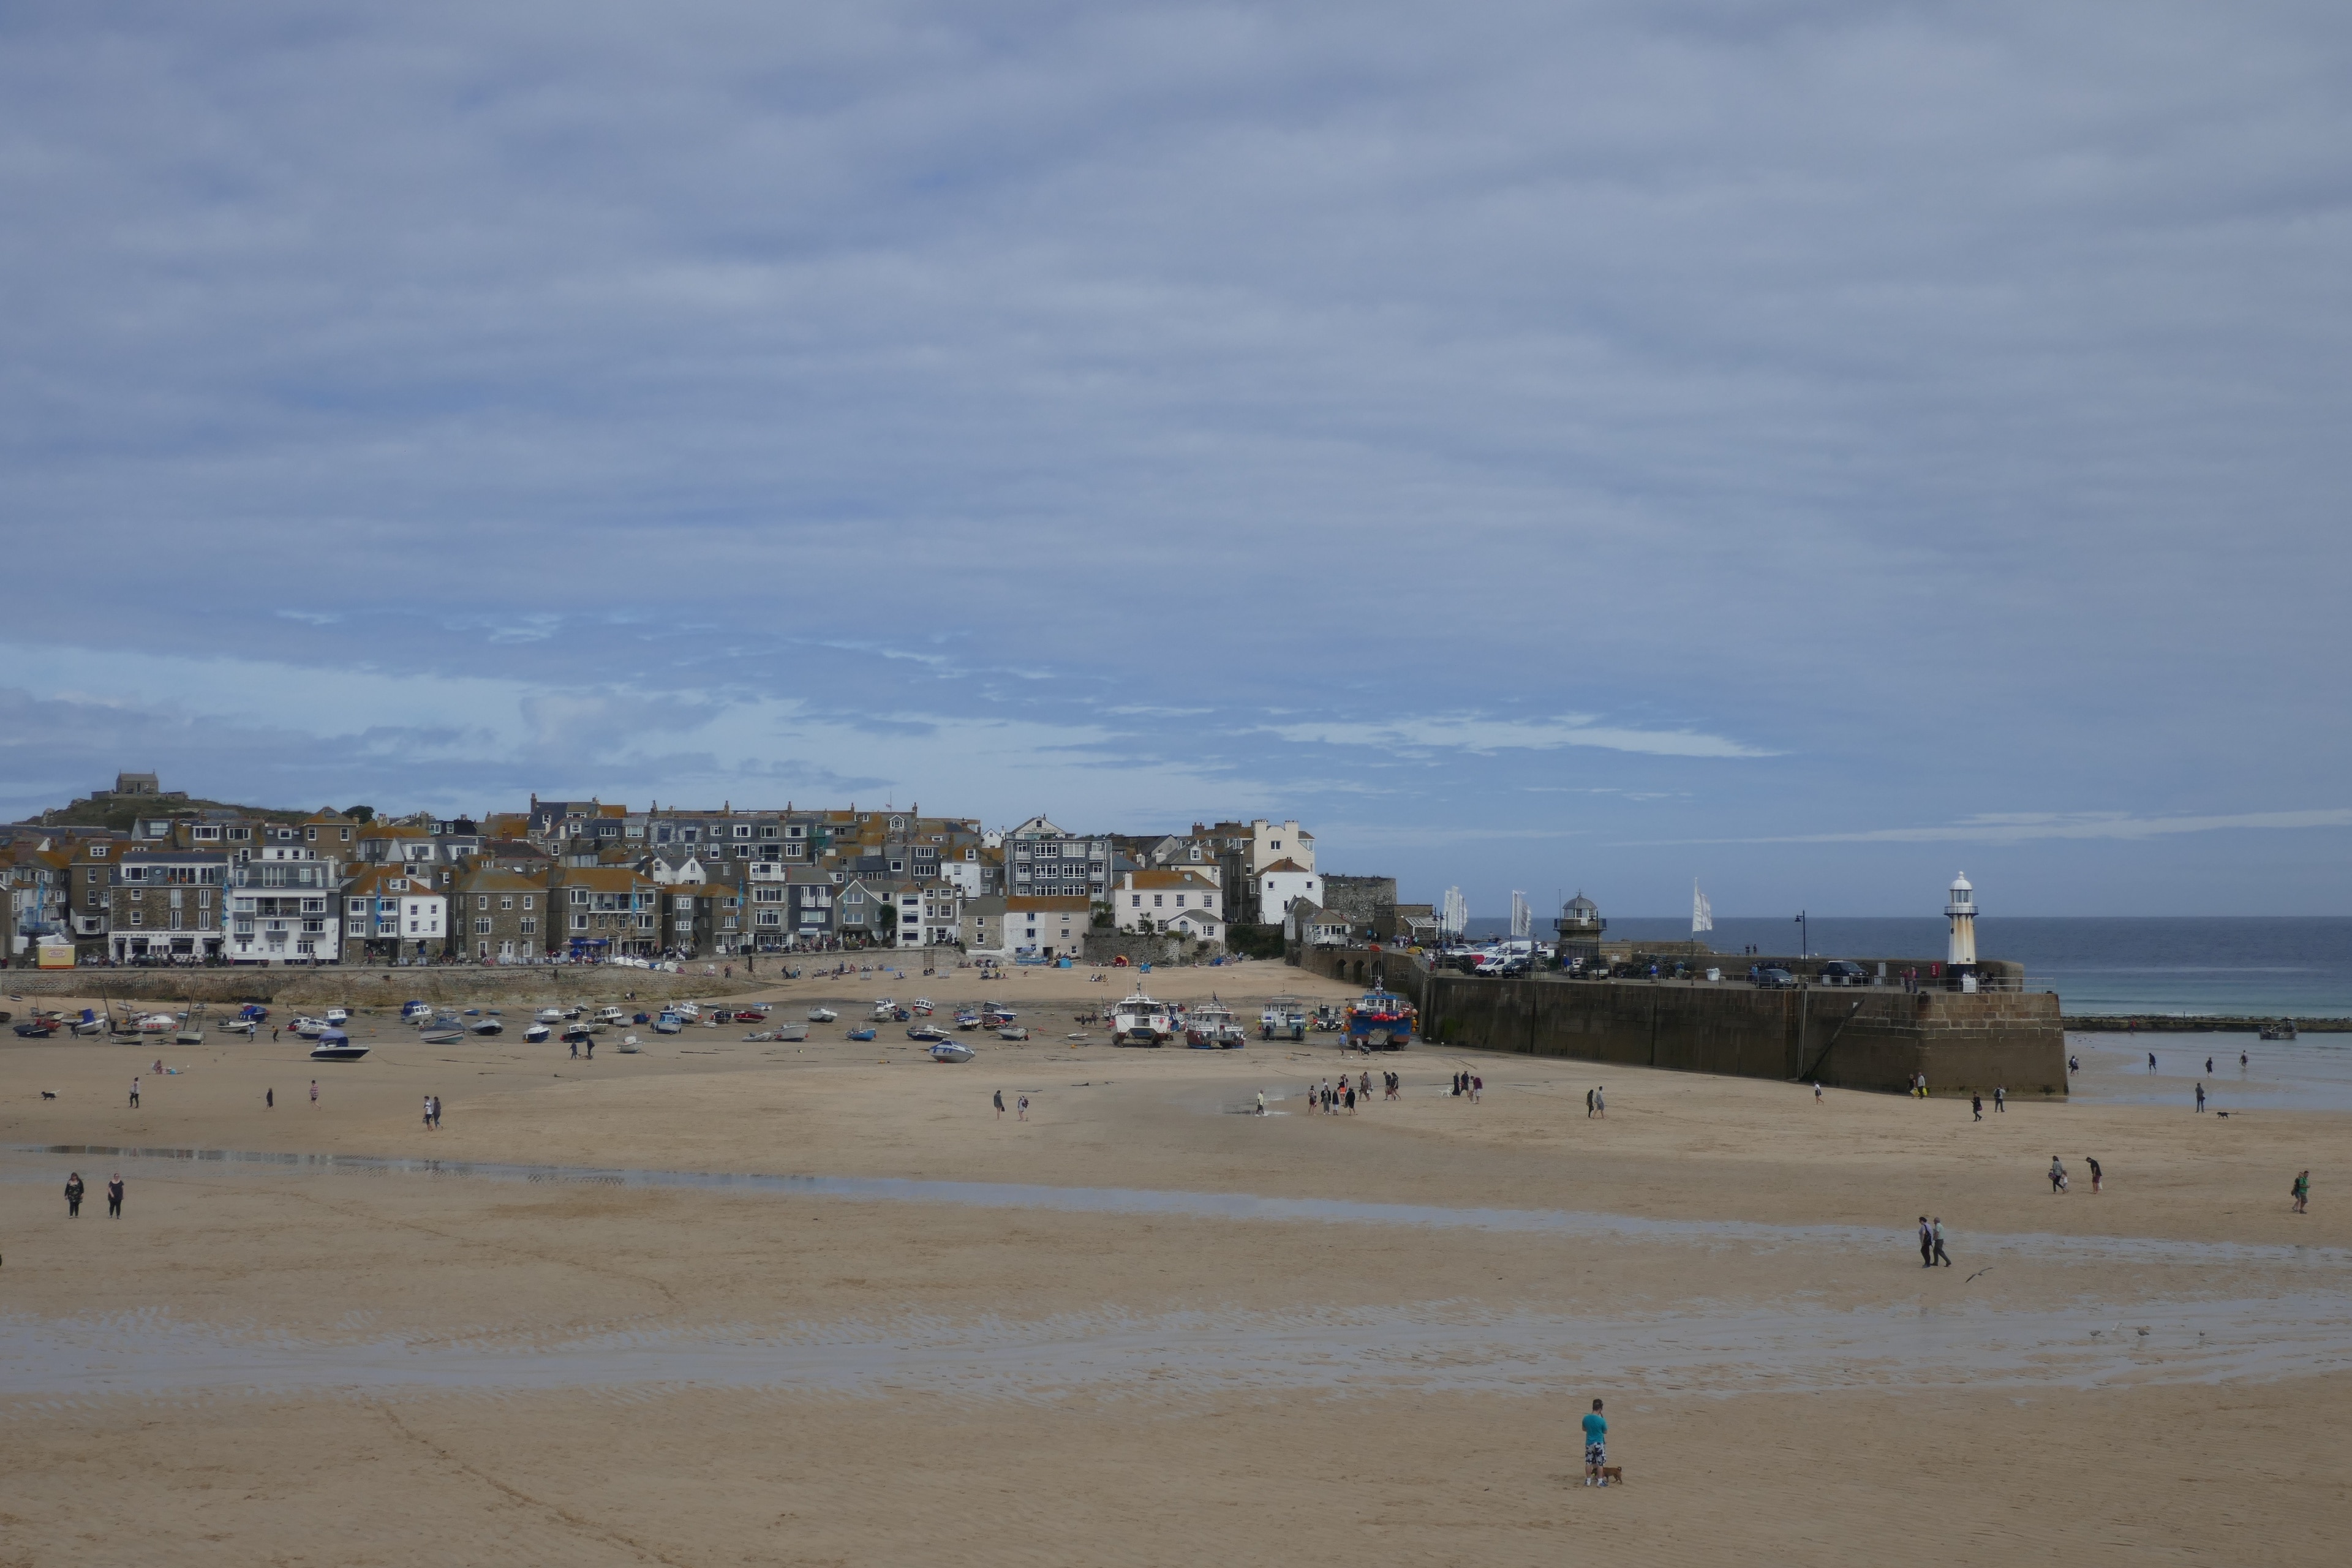 St Ives Harbour at low tide is a great area to walk the dog!

If you miss the low tide, take a walk along the coast to the west of the town and wander up to St Nicholas Chapel at the top of the hill behind the main town.

A wonderful Cornish seaside town don't forget to try some fish and chips.

#lifeatexpedia; #beach